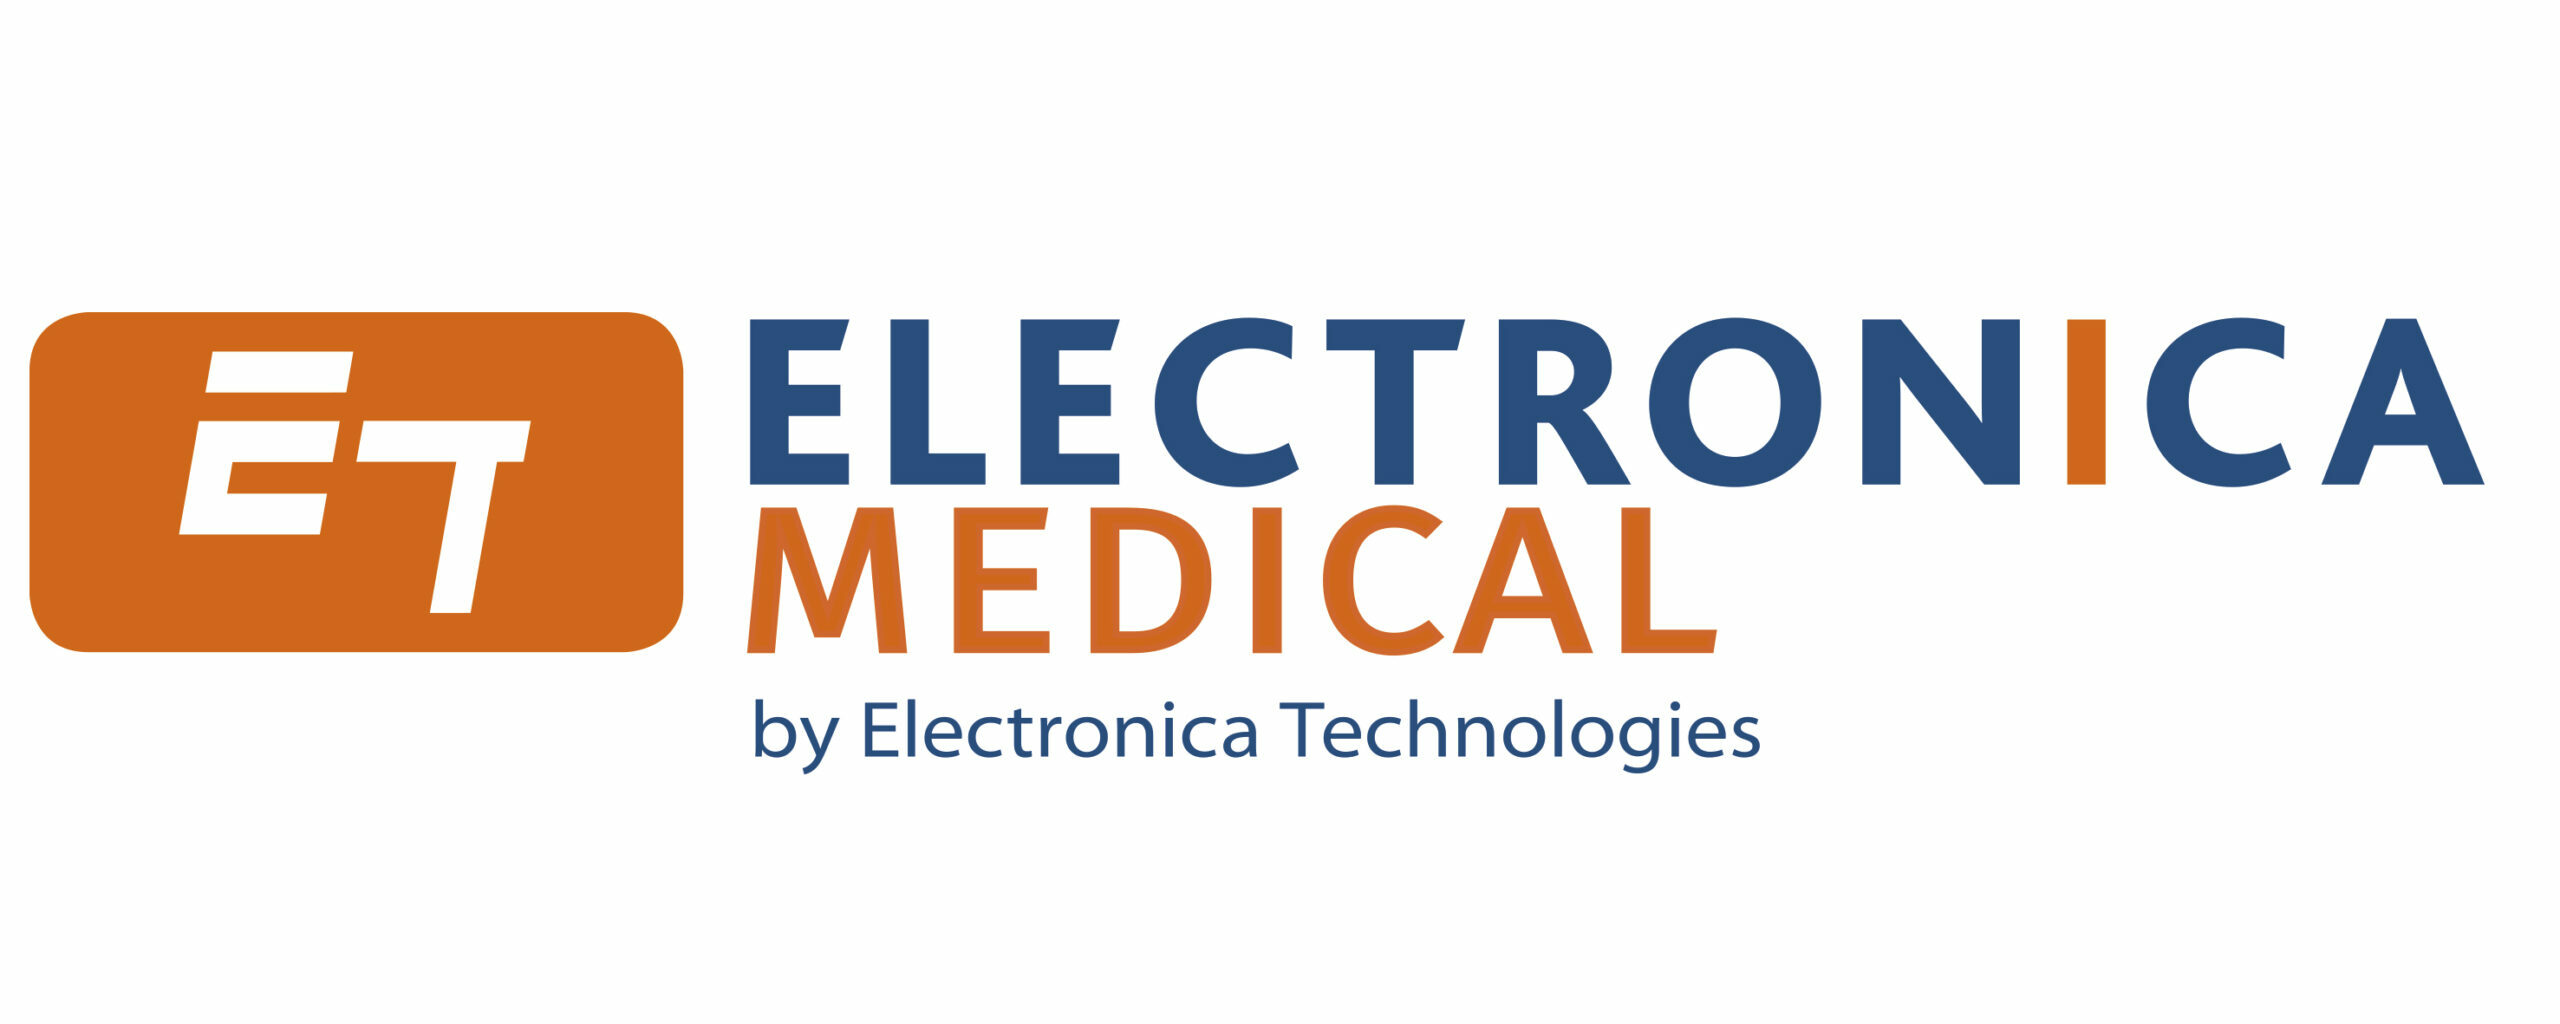 Elettronica Medicale